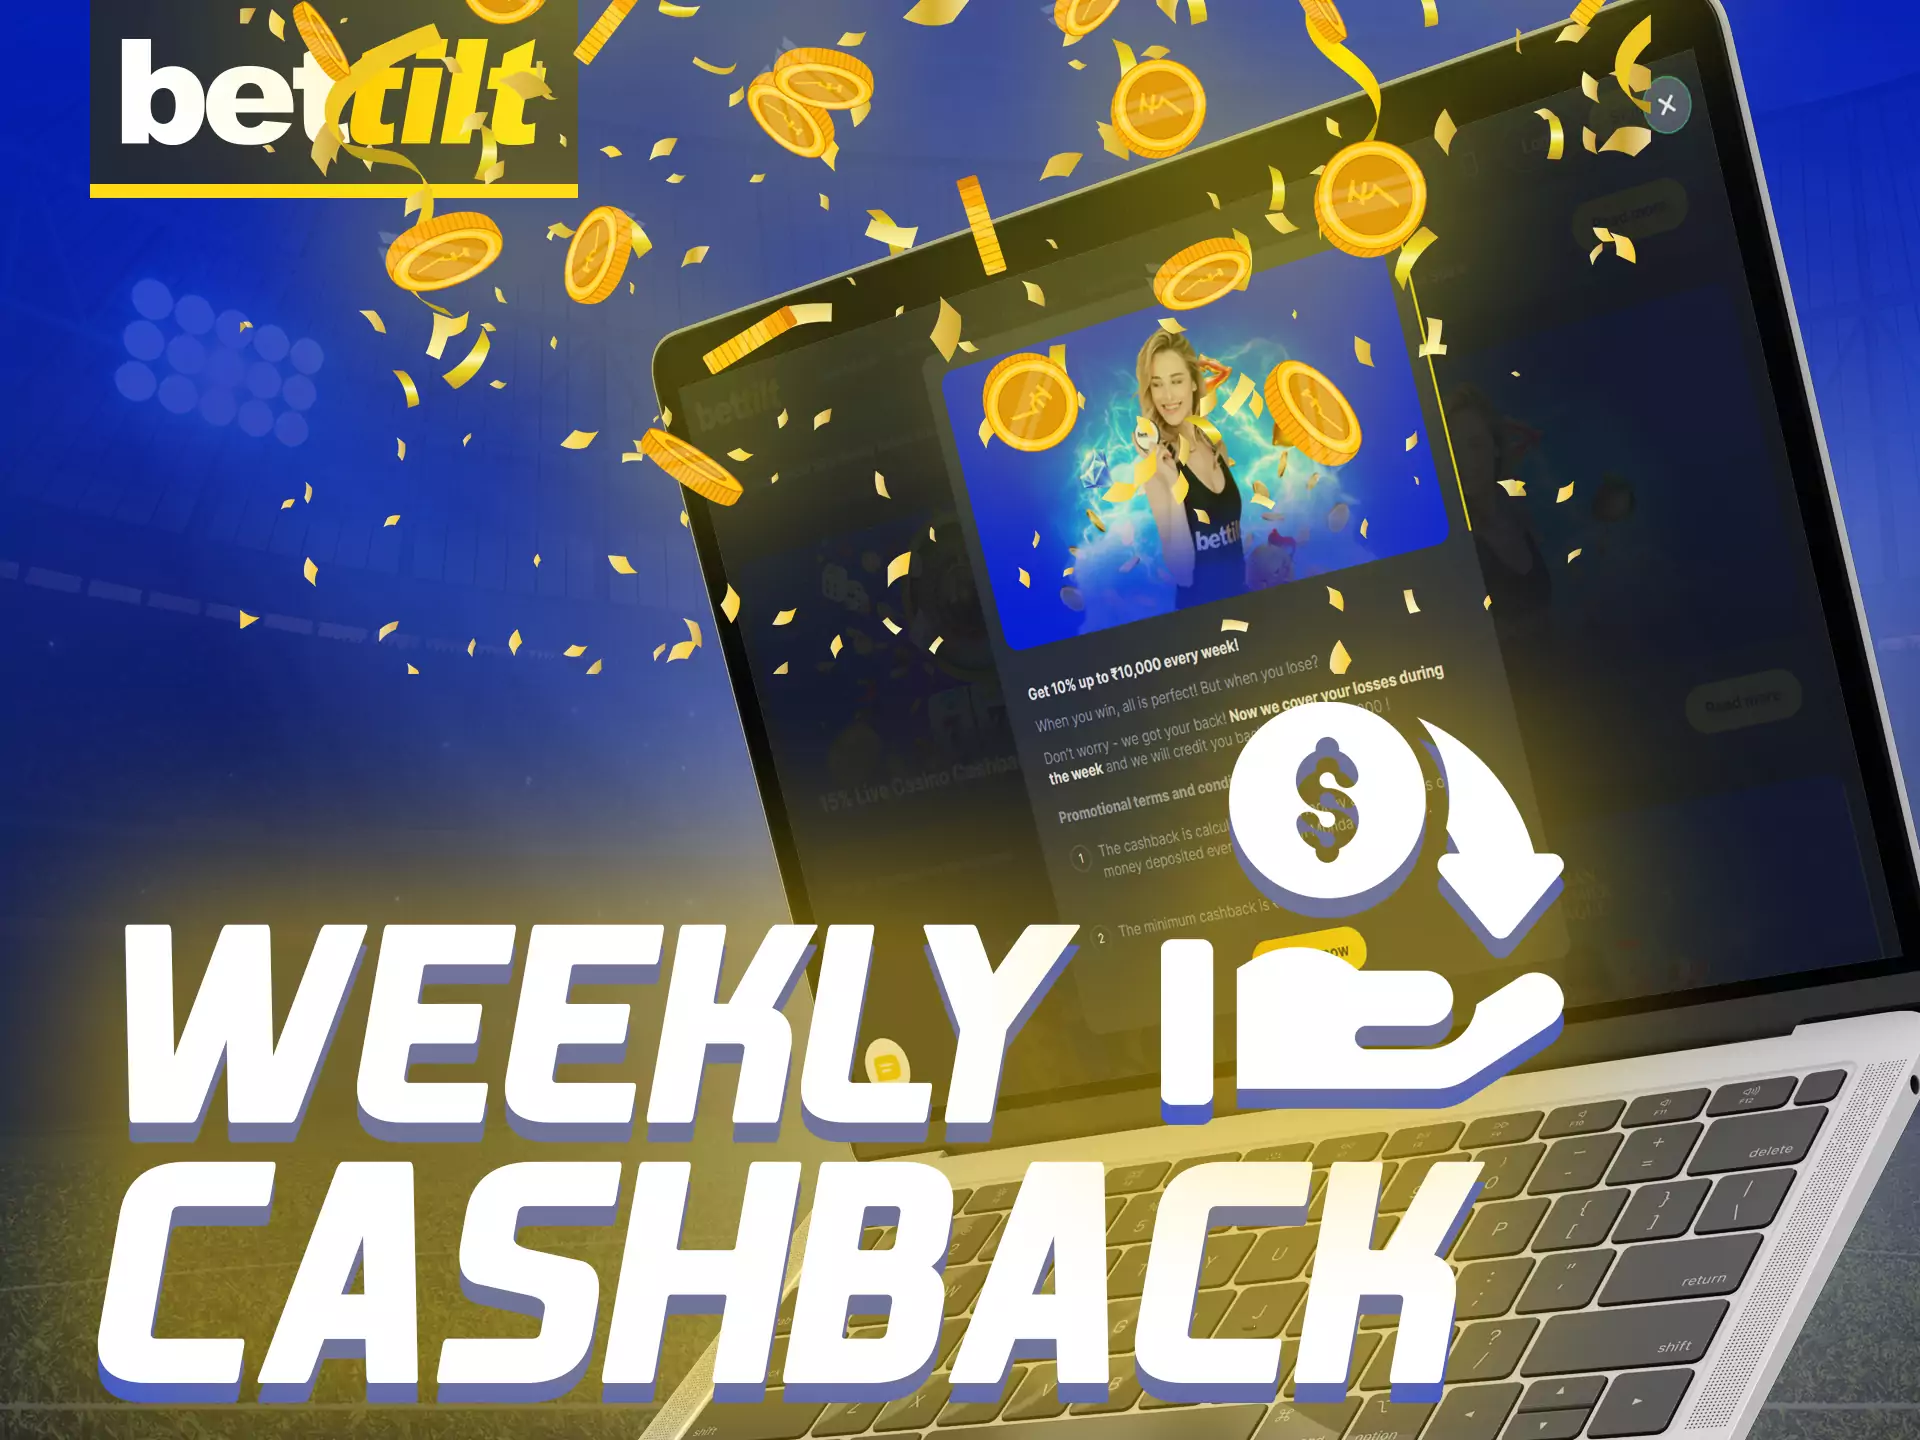 Bettilt has a bonus with which you can get cashback every week.